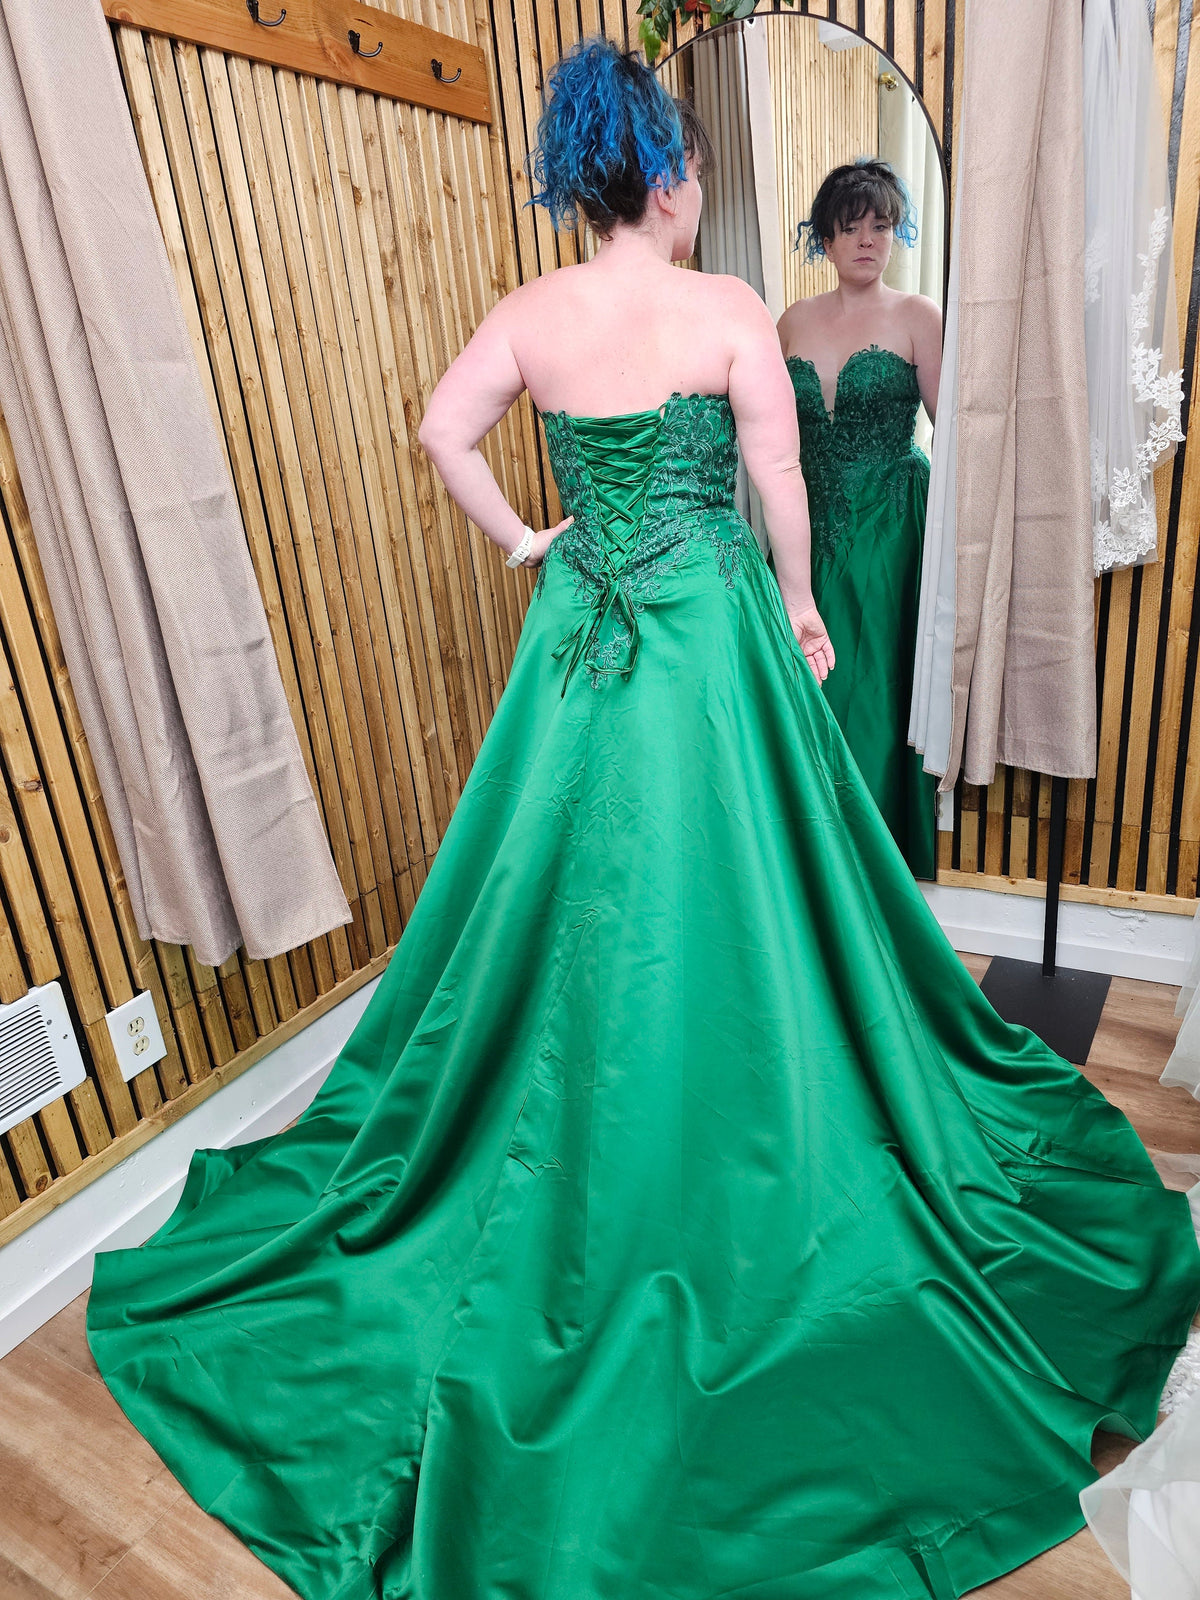 Untraditional Emerald Green Wedding Dress Bridal Gown Sleeveless Strapless Lace with Train Satin Open Back Corset Ties and Pockets